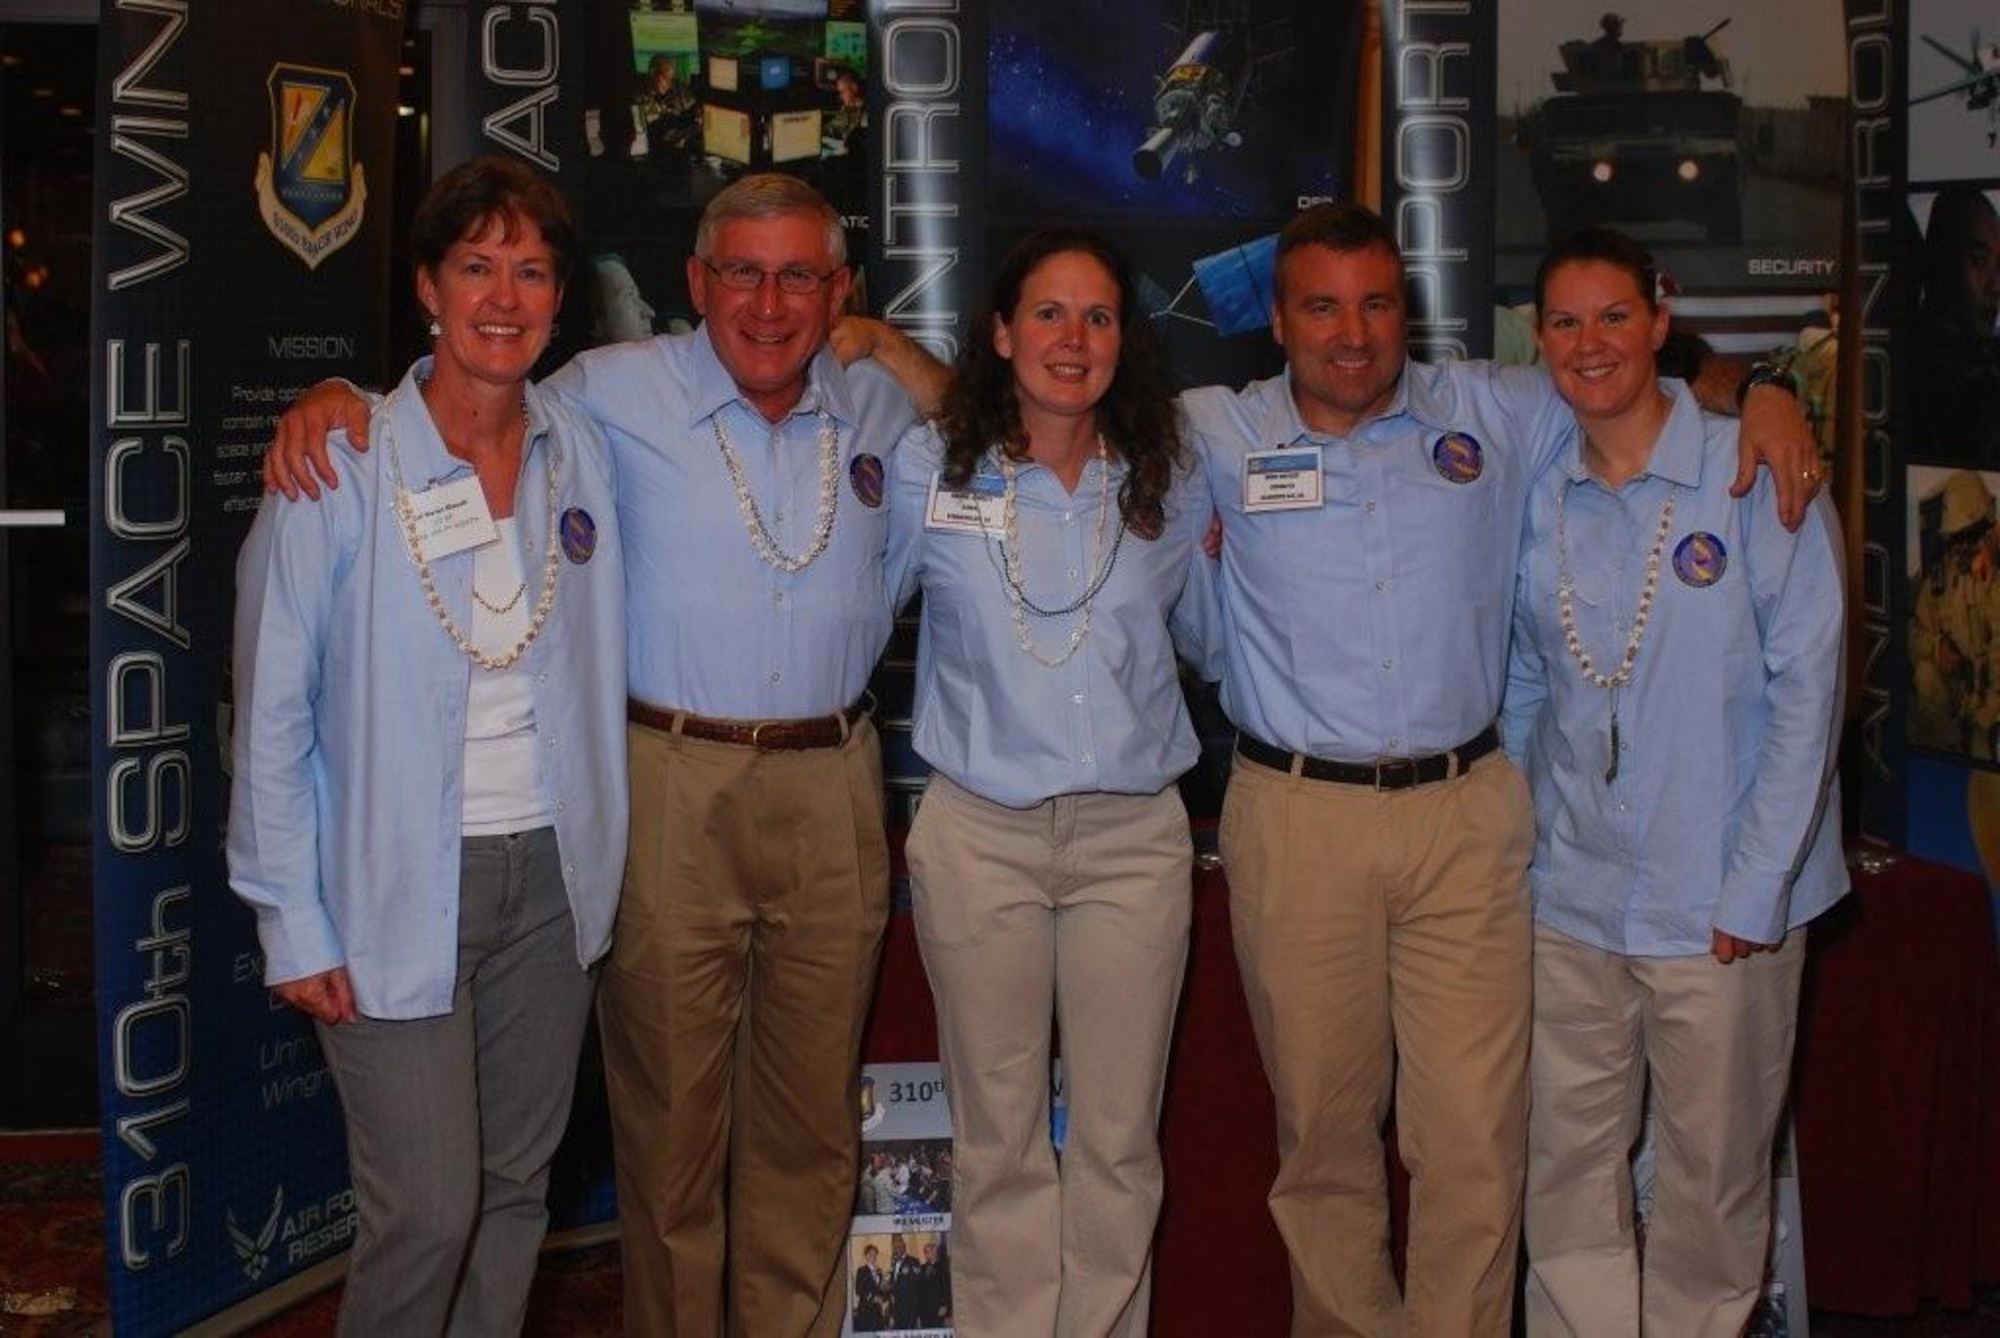 From left, Col. Karen Rizzuti, Lt. Col. (Chaplain) Robert Leivers,  Maj. Shanna Corbett, Col. Mark Hustedt, and Tech. Sgt. Kasey Grindrod manned the the wing display at the HRDC workshop in Atlanta on Oct. 27. The group shared the accomplishments of the 310th Space Wing that would later Garner the McNeil Award.(Courtesy photo)